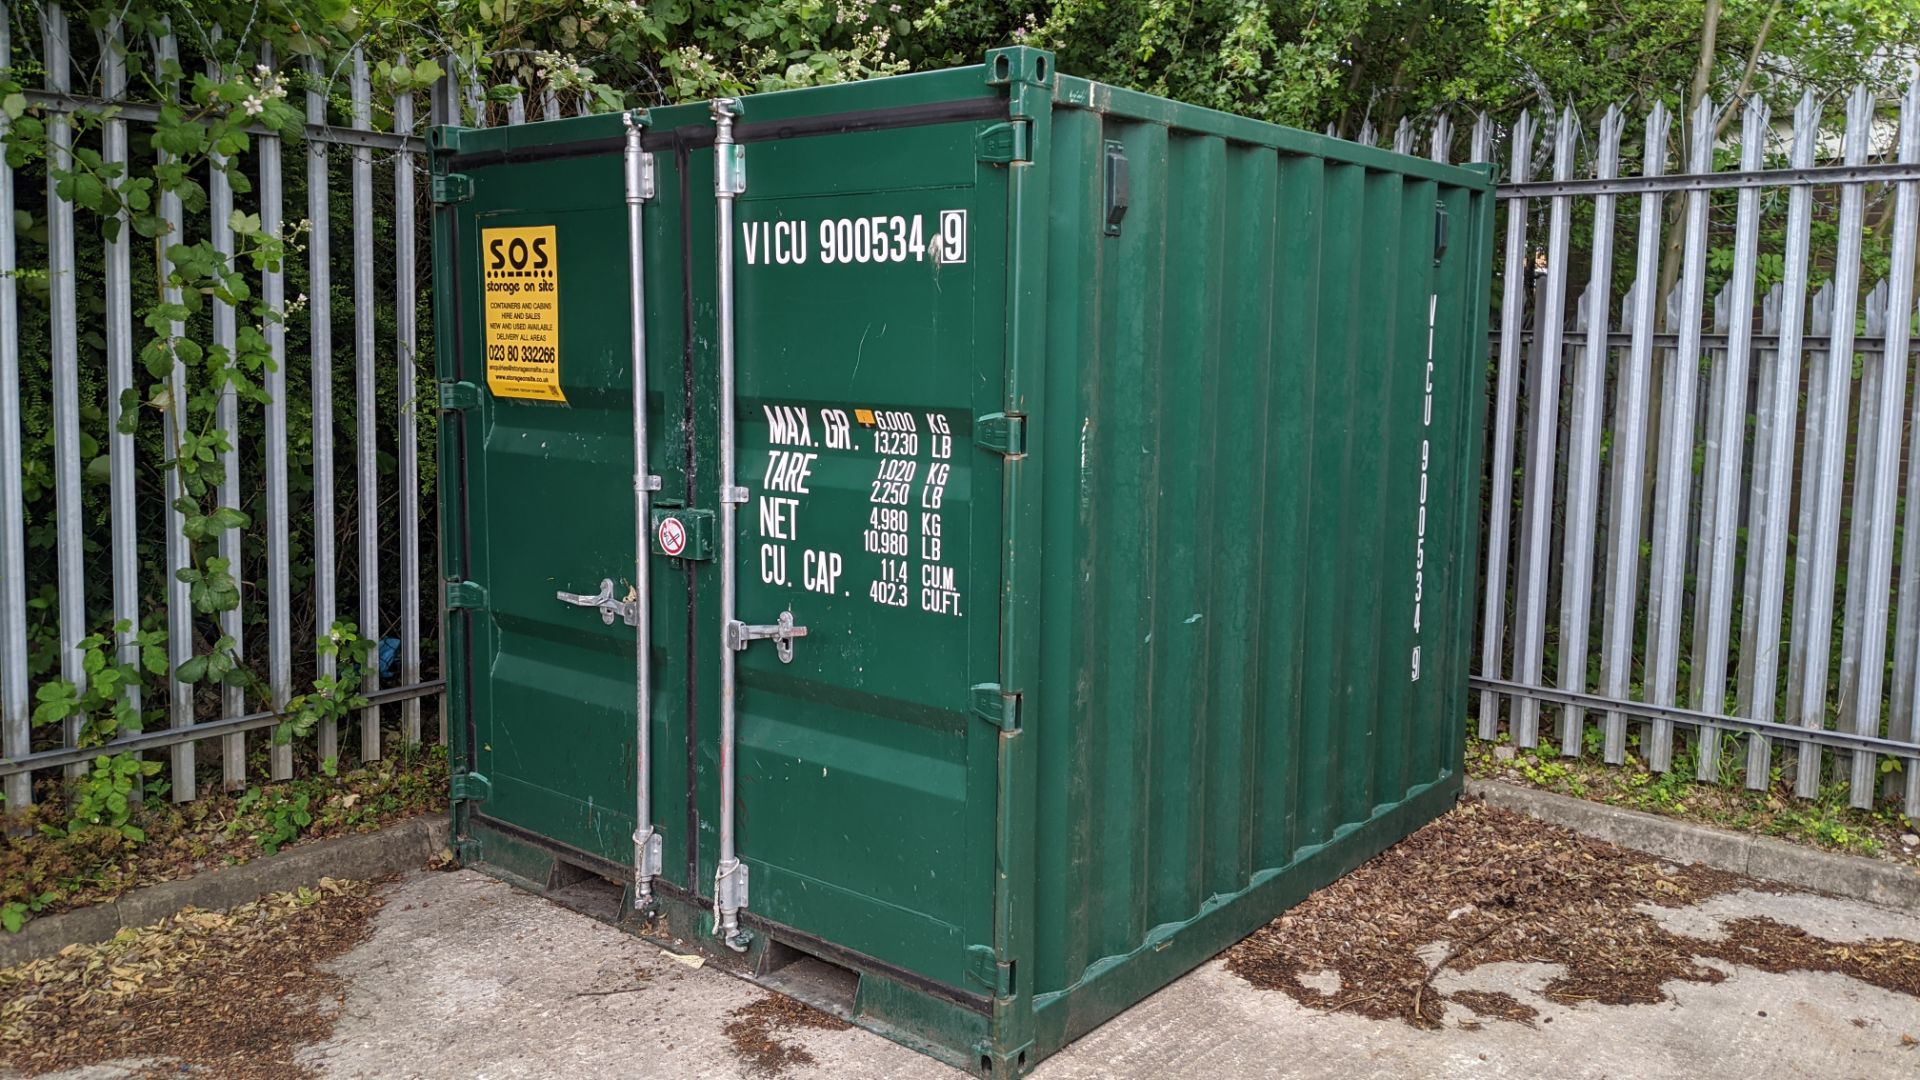 Shipping container, approximately 7'2" wide & 9' deep, 11.4 cubic metres (402.3 cubic feet), max